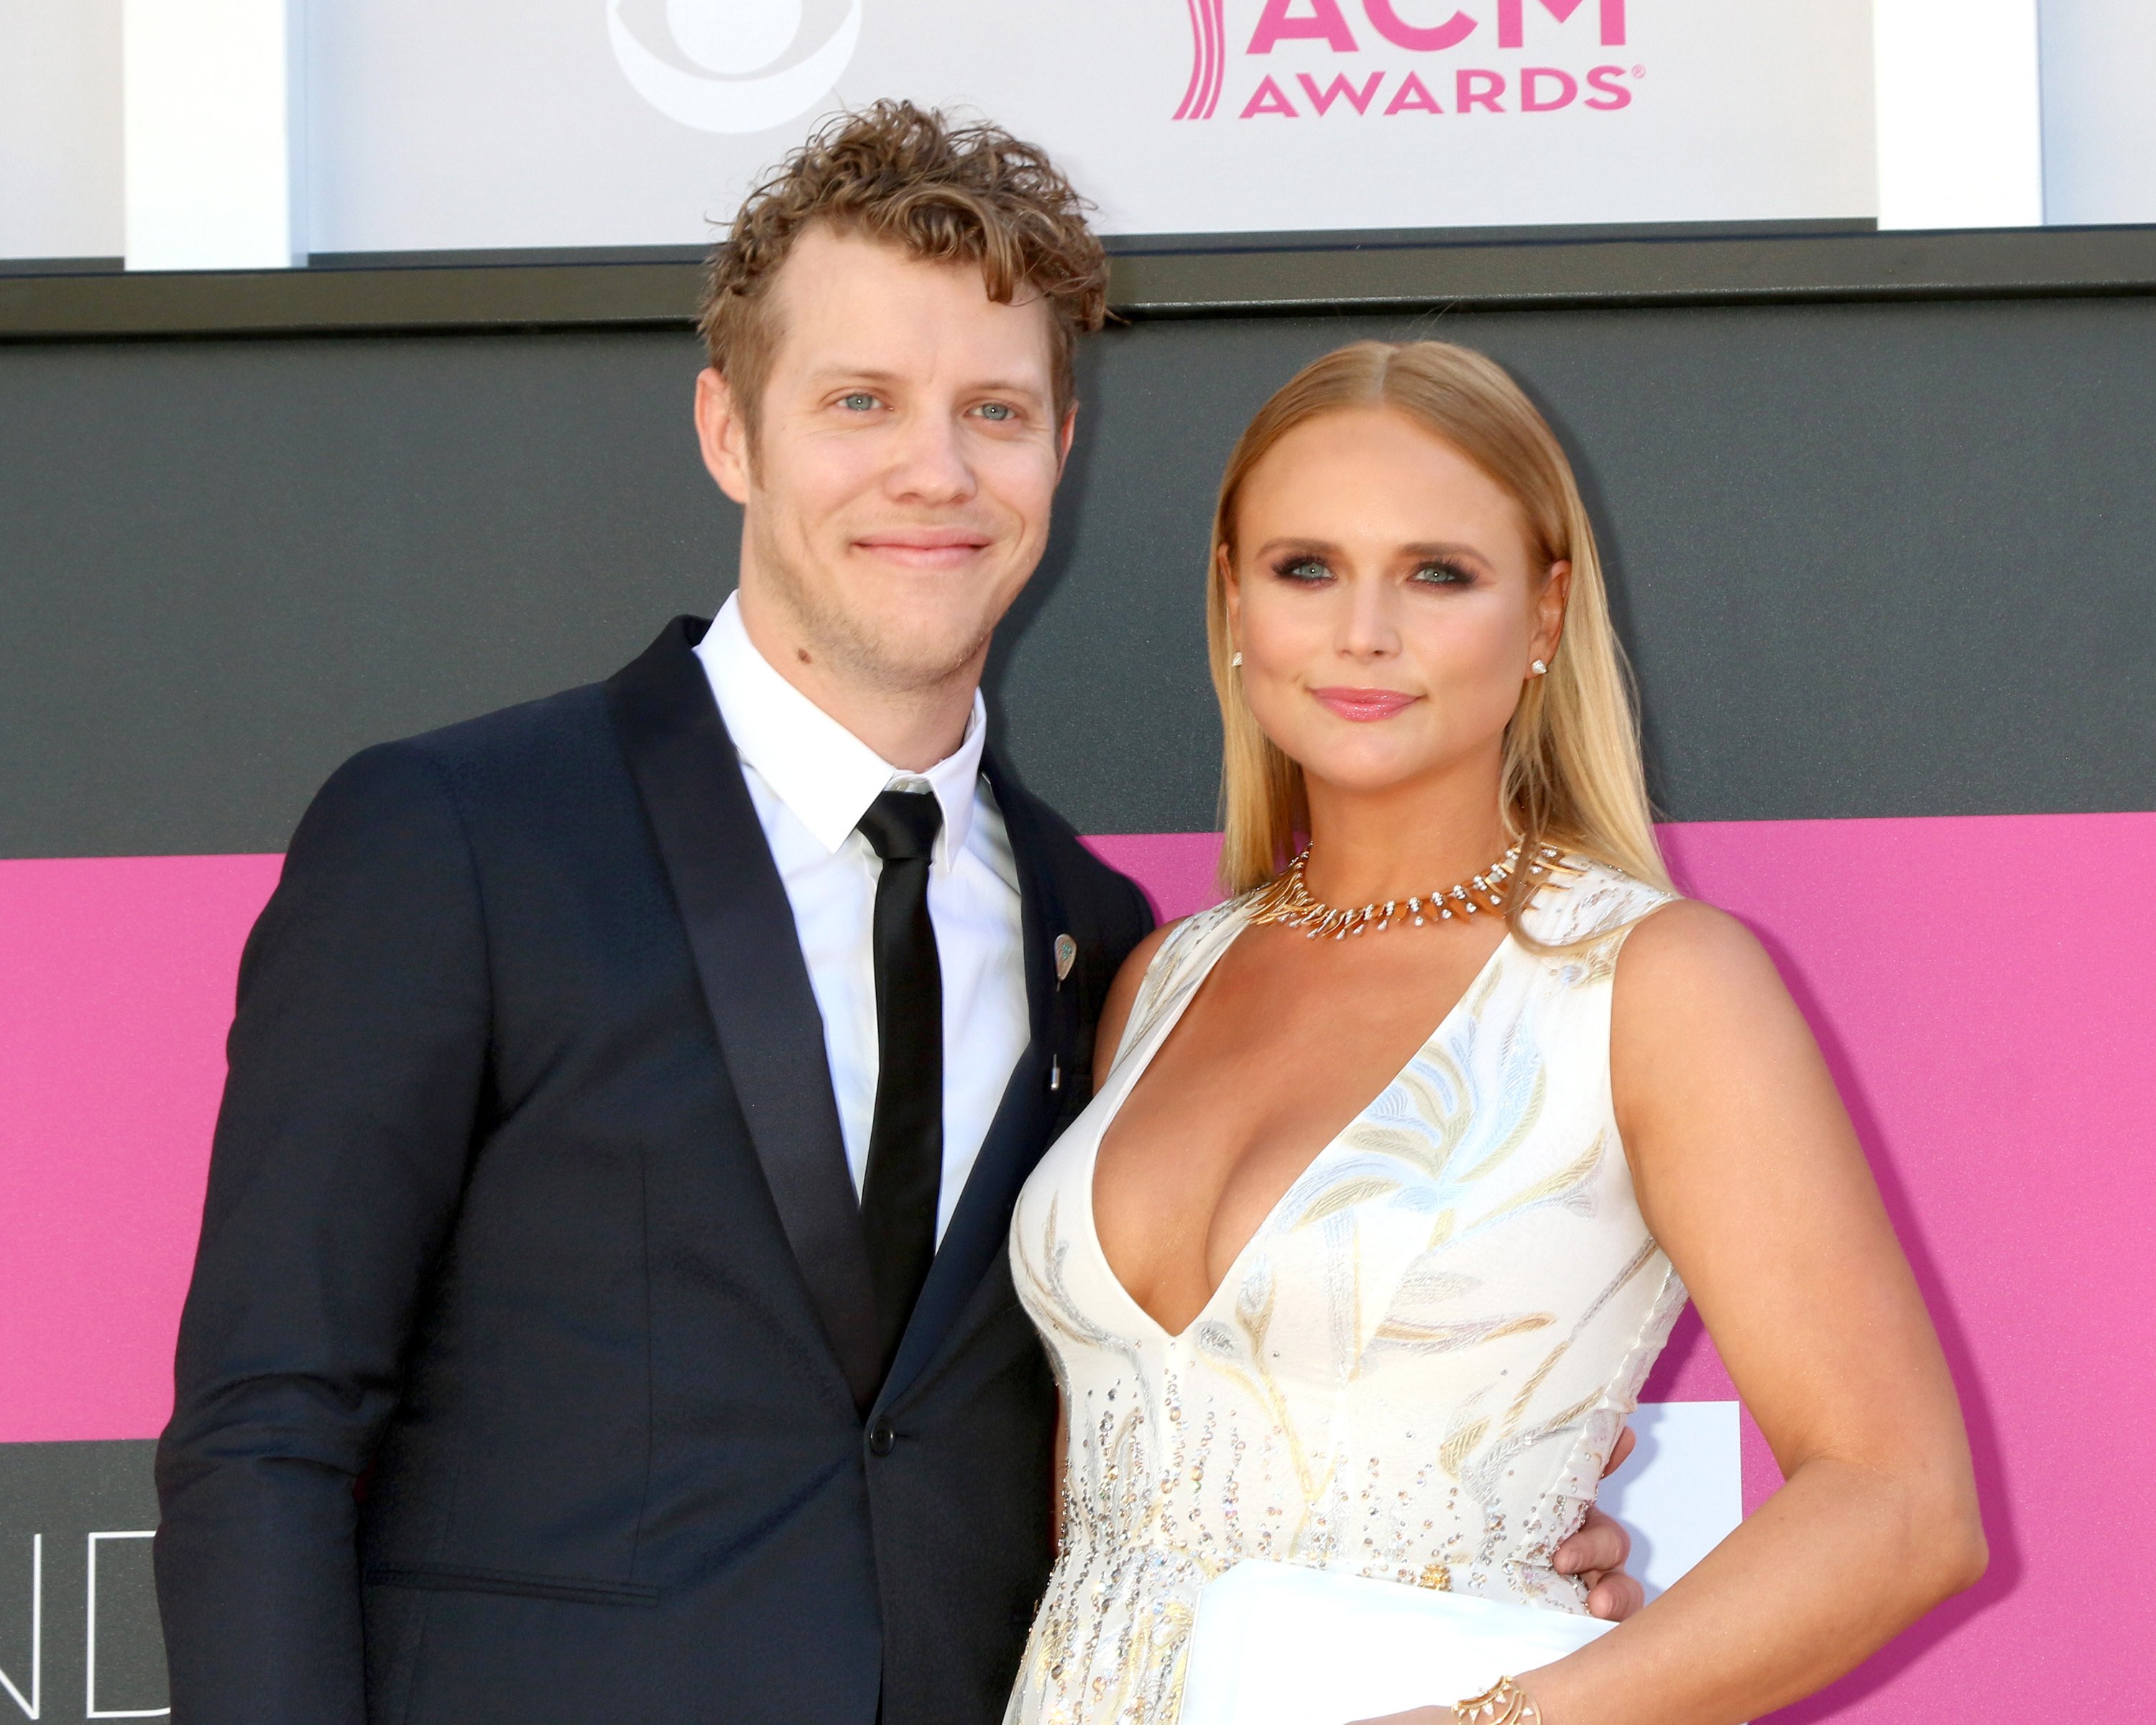 Anderson East, Miranda Lambert at the Academy of Country Music Awards 2017 in Las Vegas, NV | Source: Shutterstock